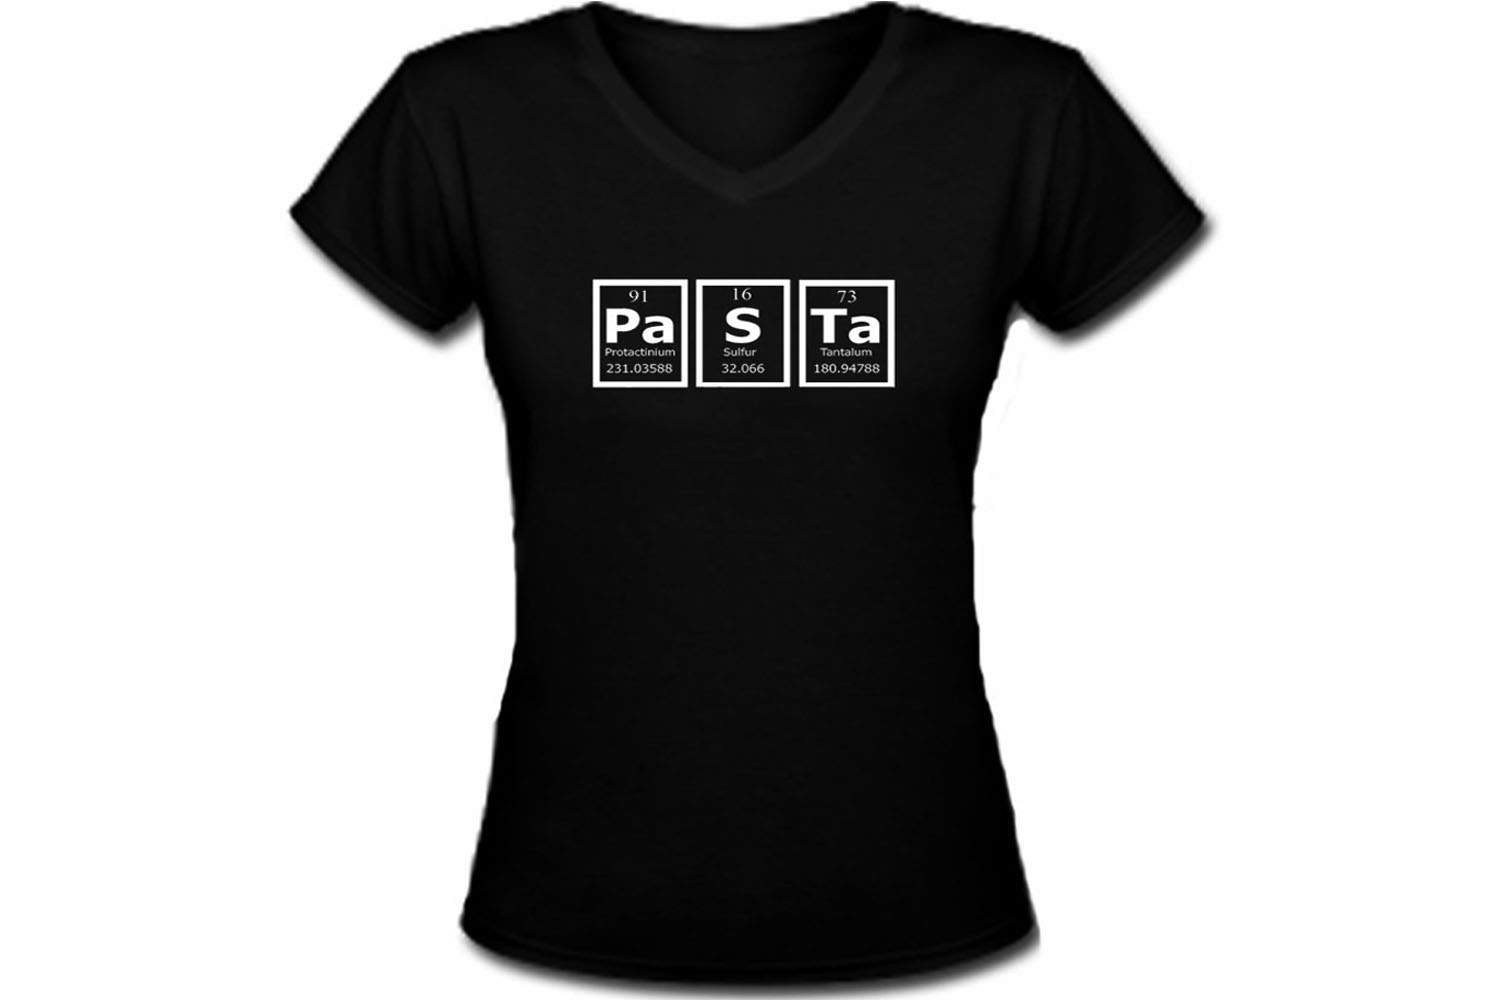 Pasta-mendeleev periodic table of elements women nerdy t shirt